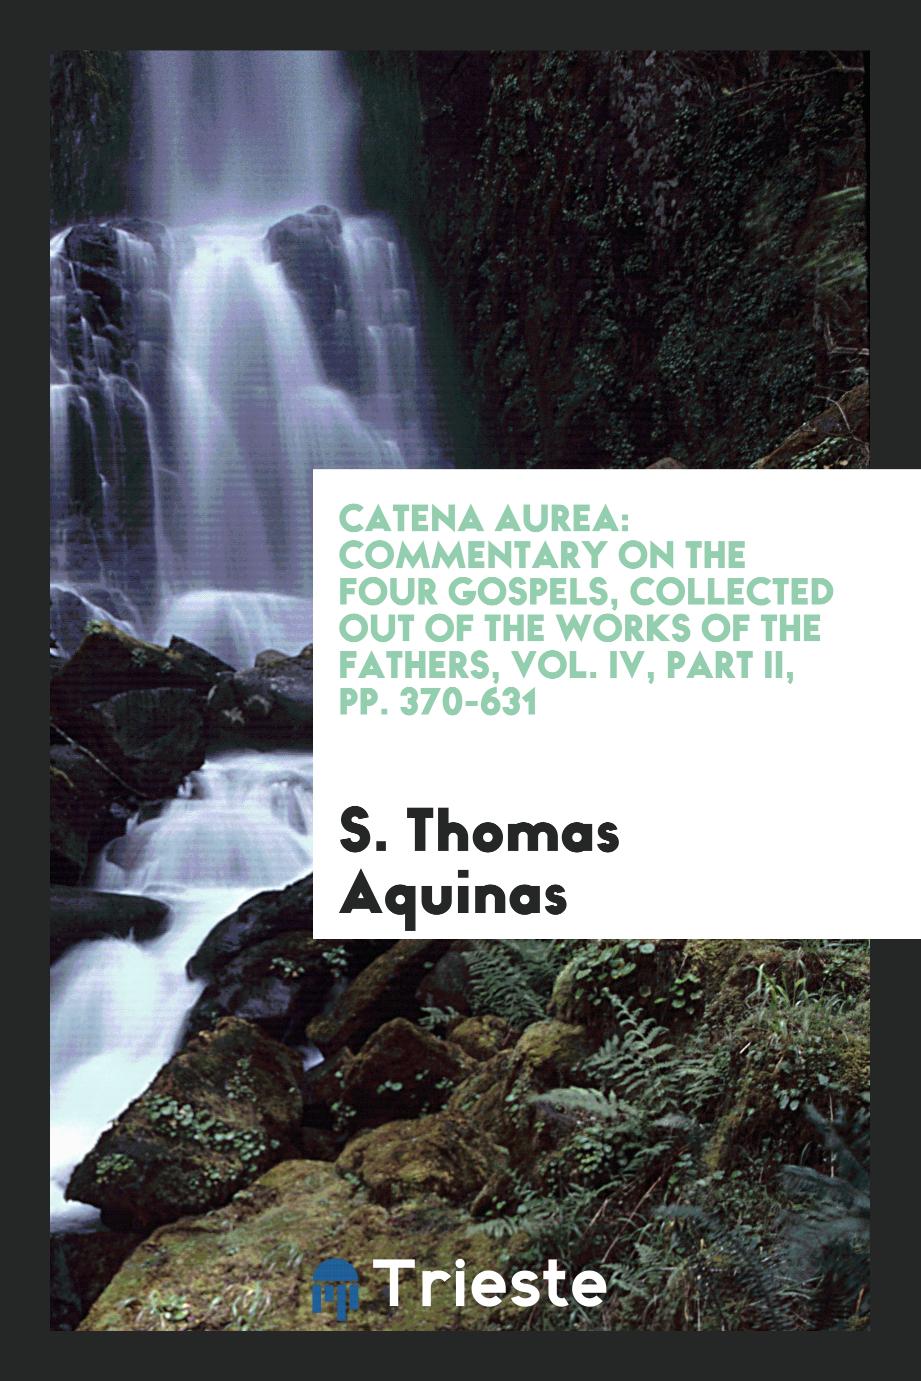 Catena aurea: commentary on the four Gospels, collected out of the works of the Fathers, Vol. IV, Part II, pp. 370-631